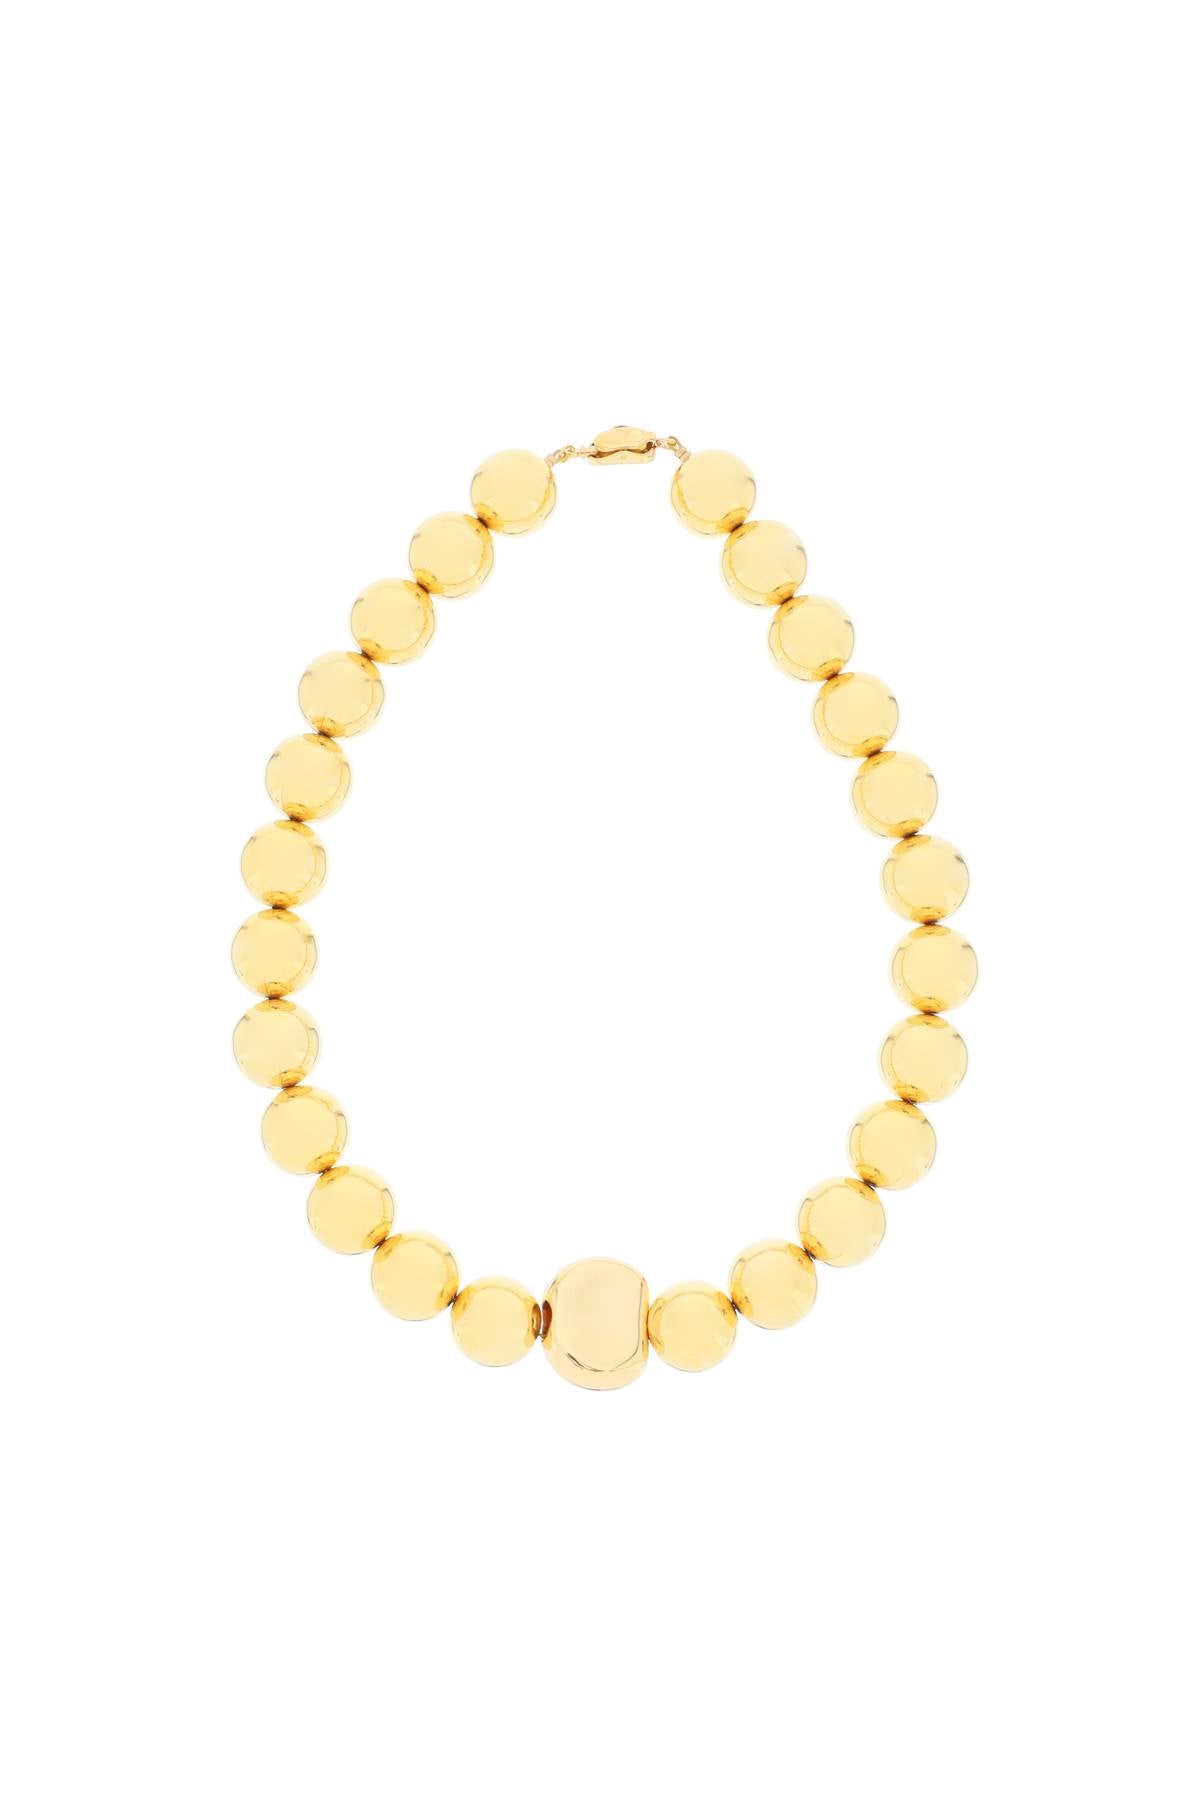 GOLD TIMELESS PEARLY  BALL NECKLACE